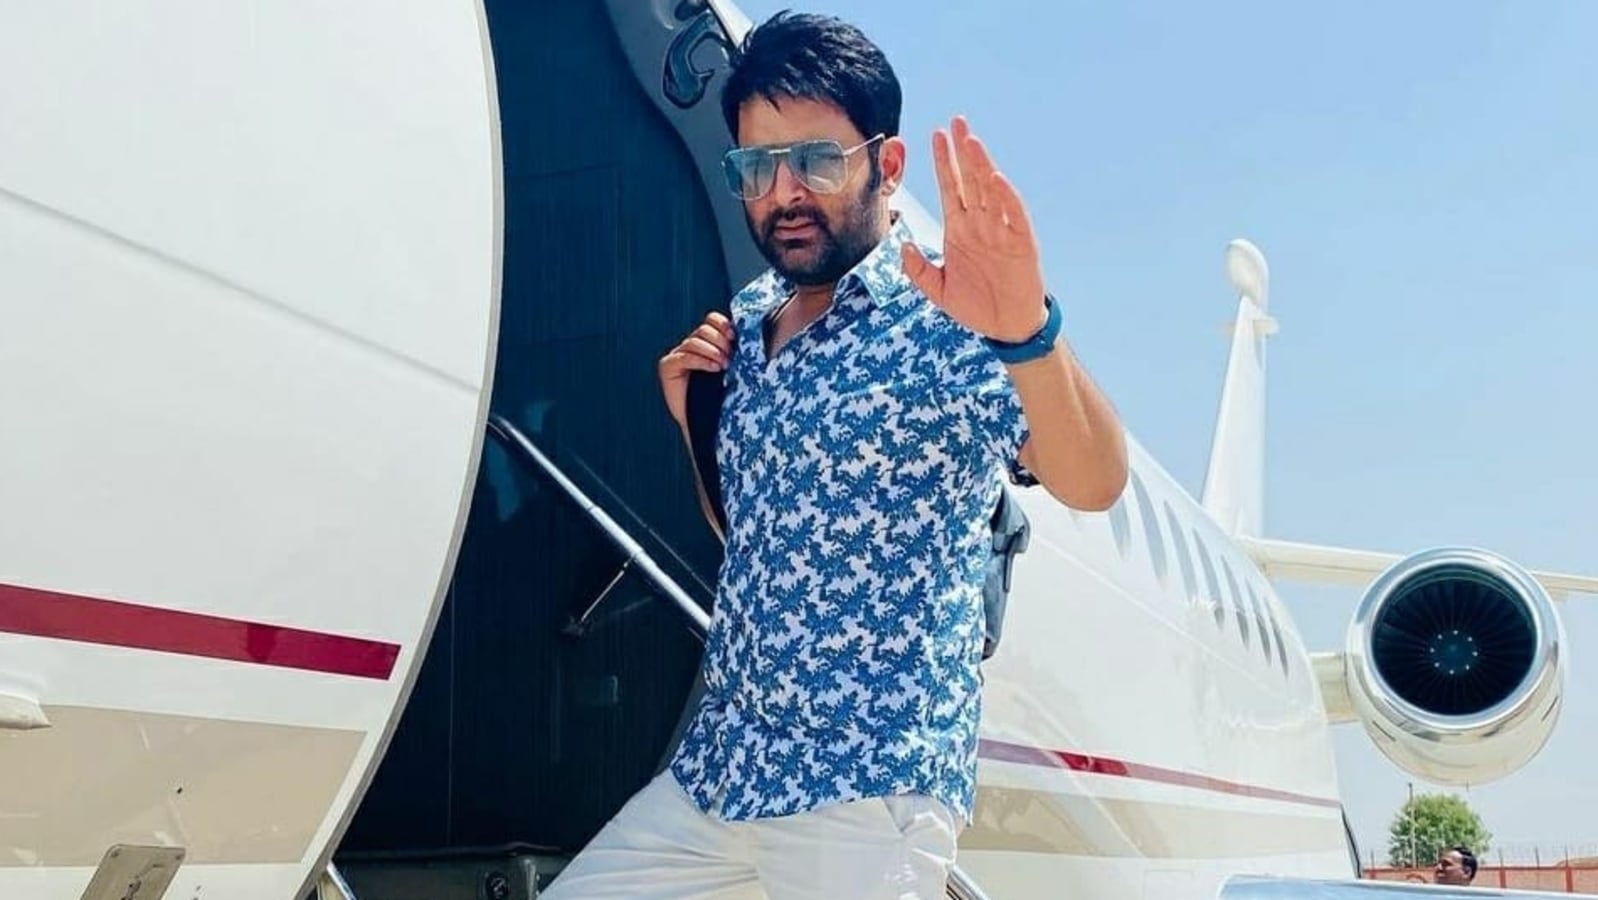 Kapil Sharma jets off to attend ‘paji’ Mika Singh’s swayamvar in Jodhpur, is worried about the groom backing out